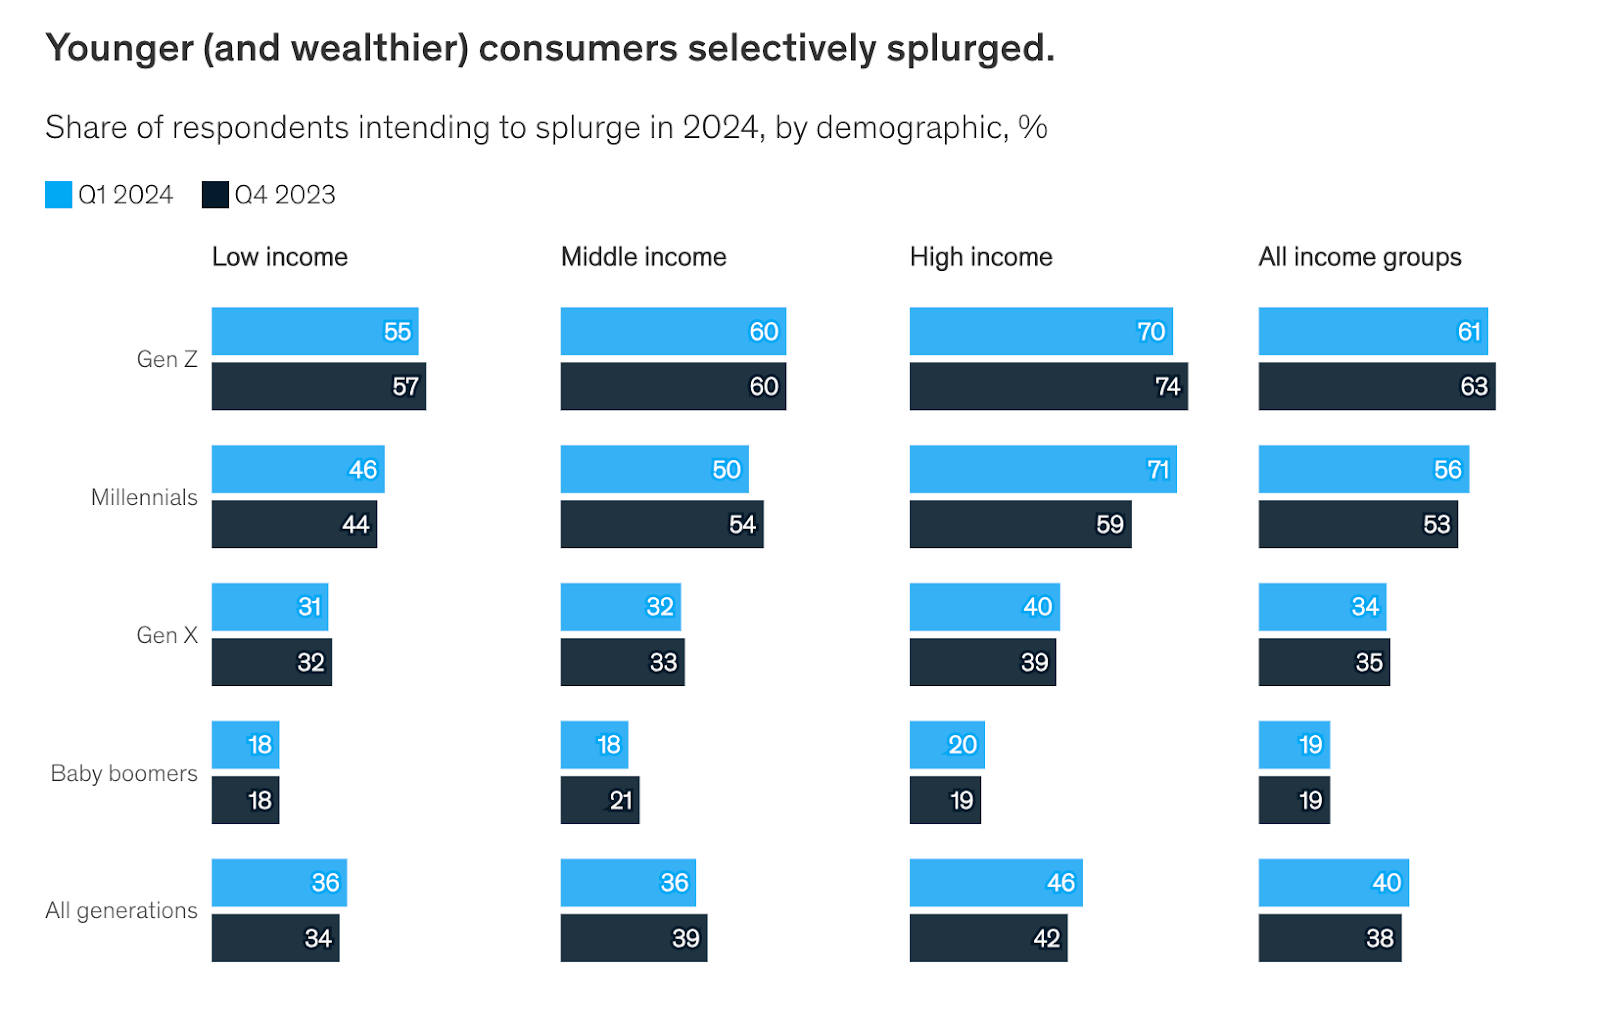 McKinsey, 55% of Gen Z consumers said they planned to splurge in 2024, compared to 54% of millennials, 31% of Gen X, and 20% of baby boomers.